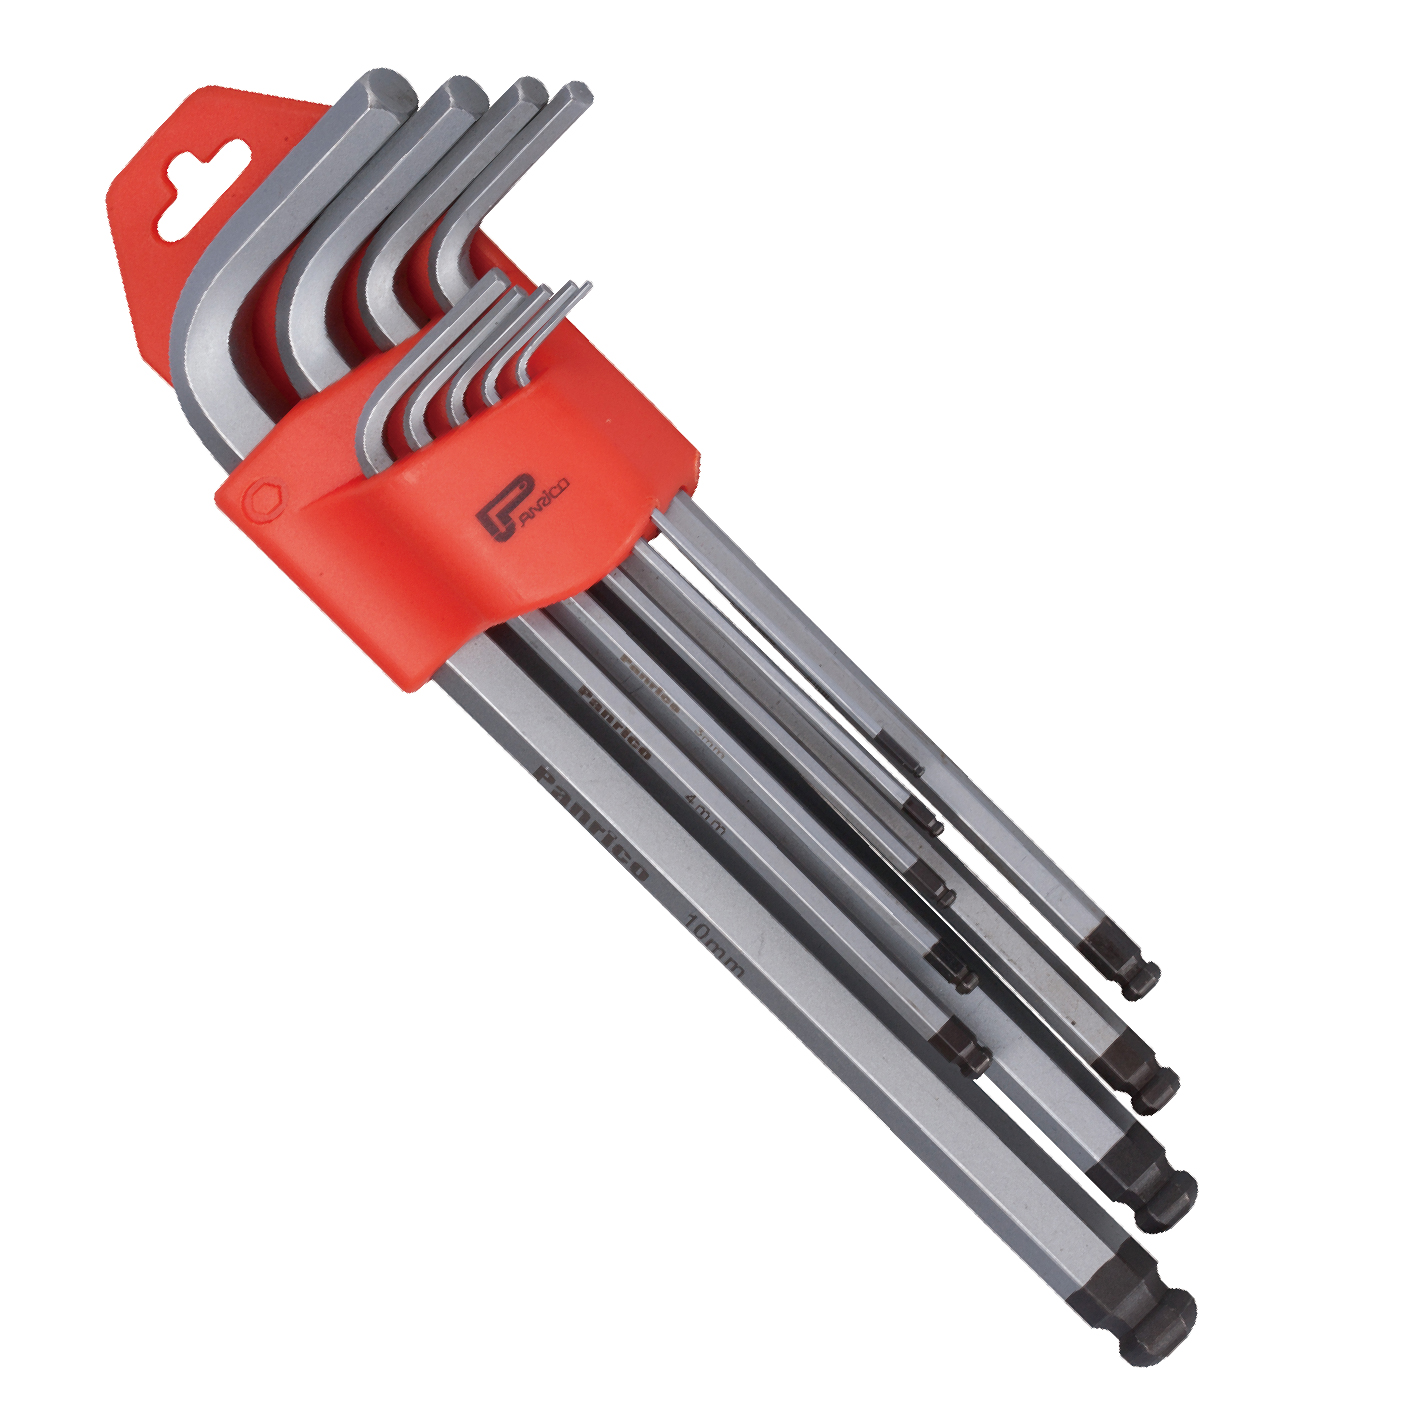 Truck / Agricultural / Heavy Duty Hex Key Wrench Set for Repair Tool Set  made by GOLDEN ROOT CO., LTD     金根貿易股份有限公司 - MatchSupplier.com